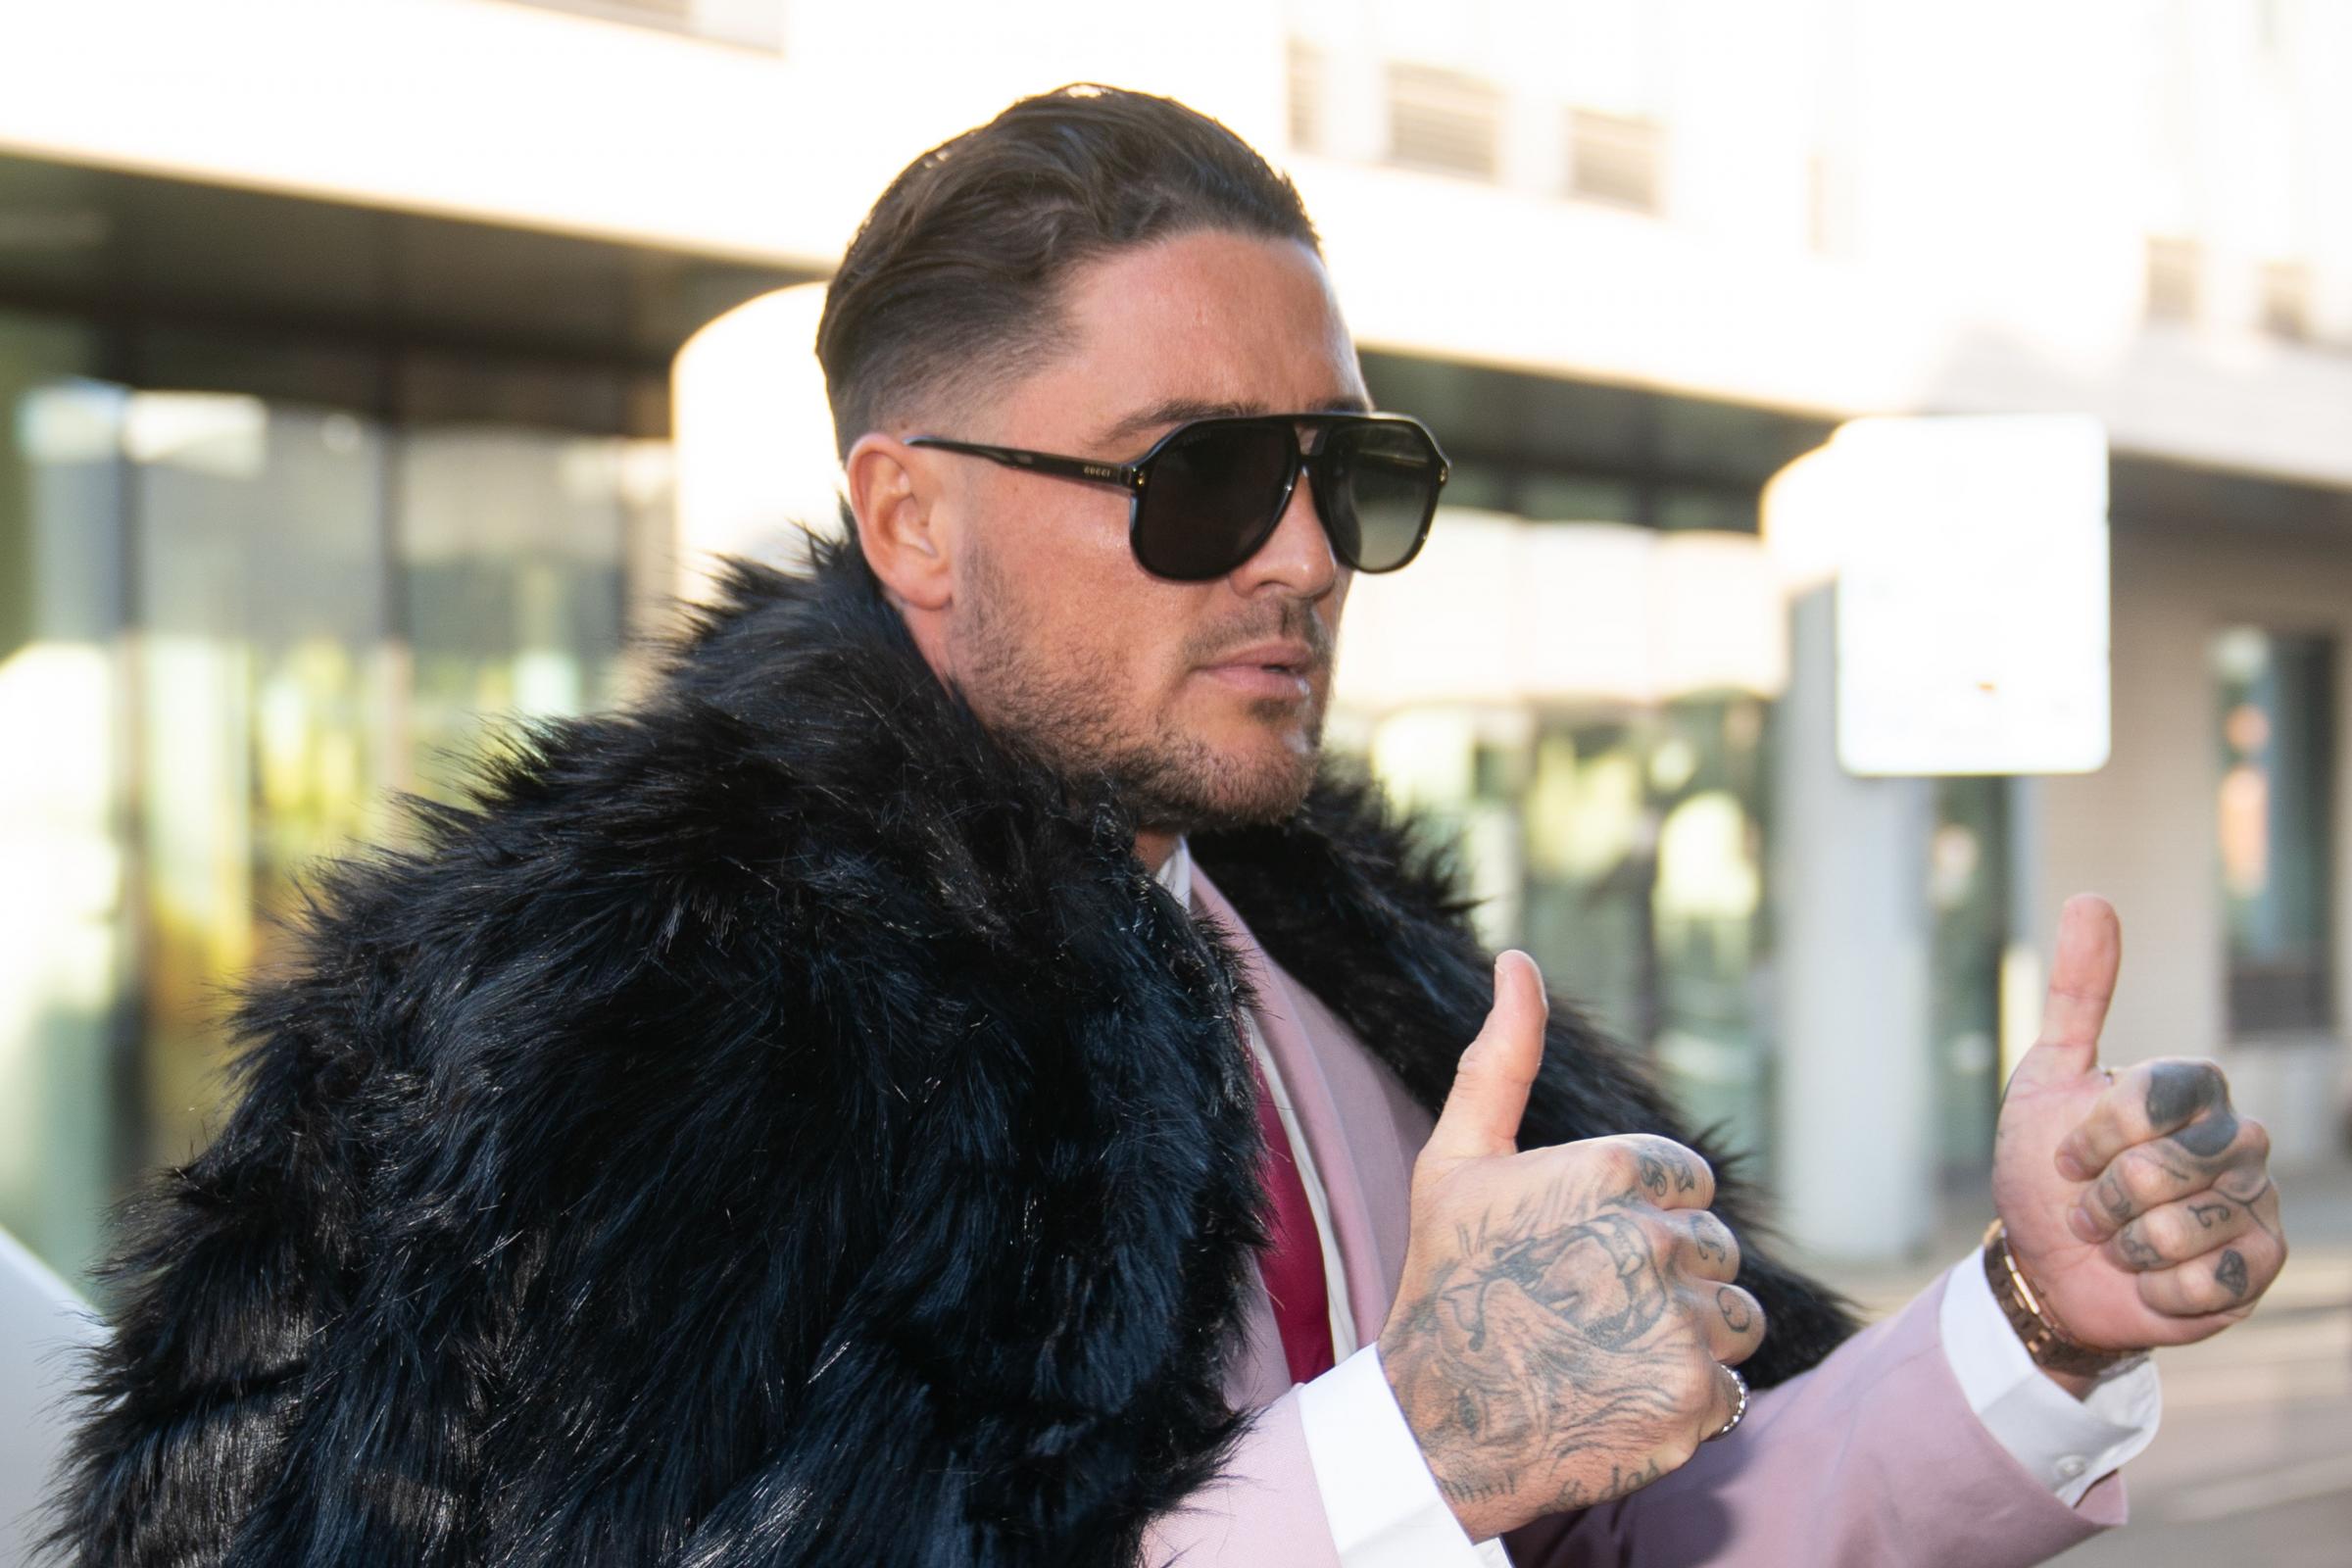 Jury begins deliberations in sex tape trial of reality TV star Stephen Bear The National